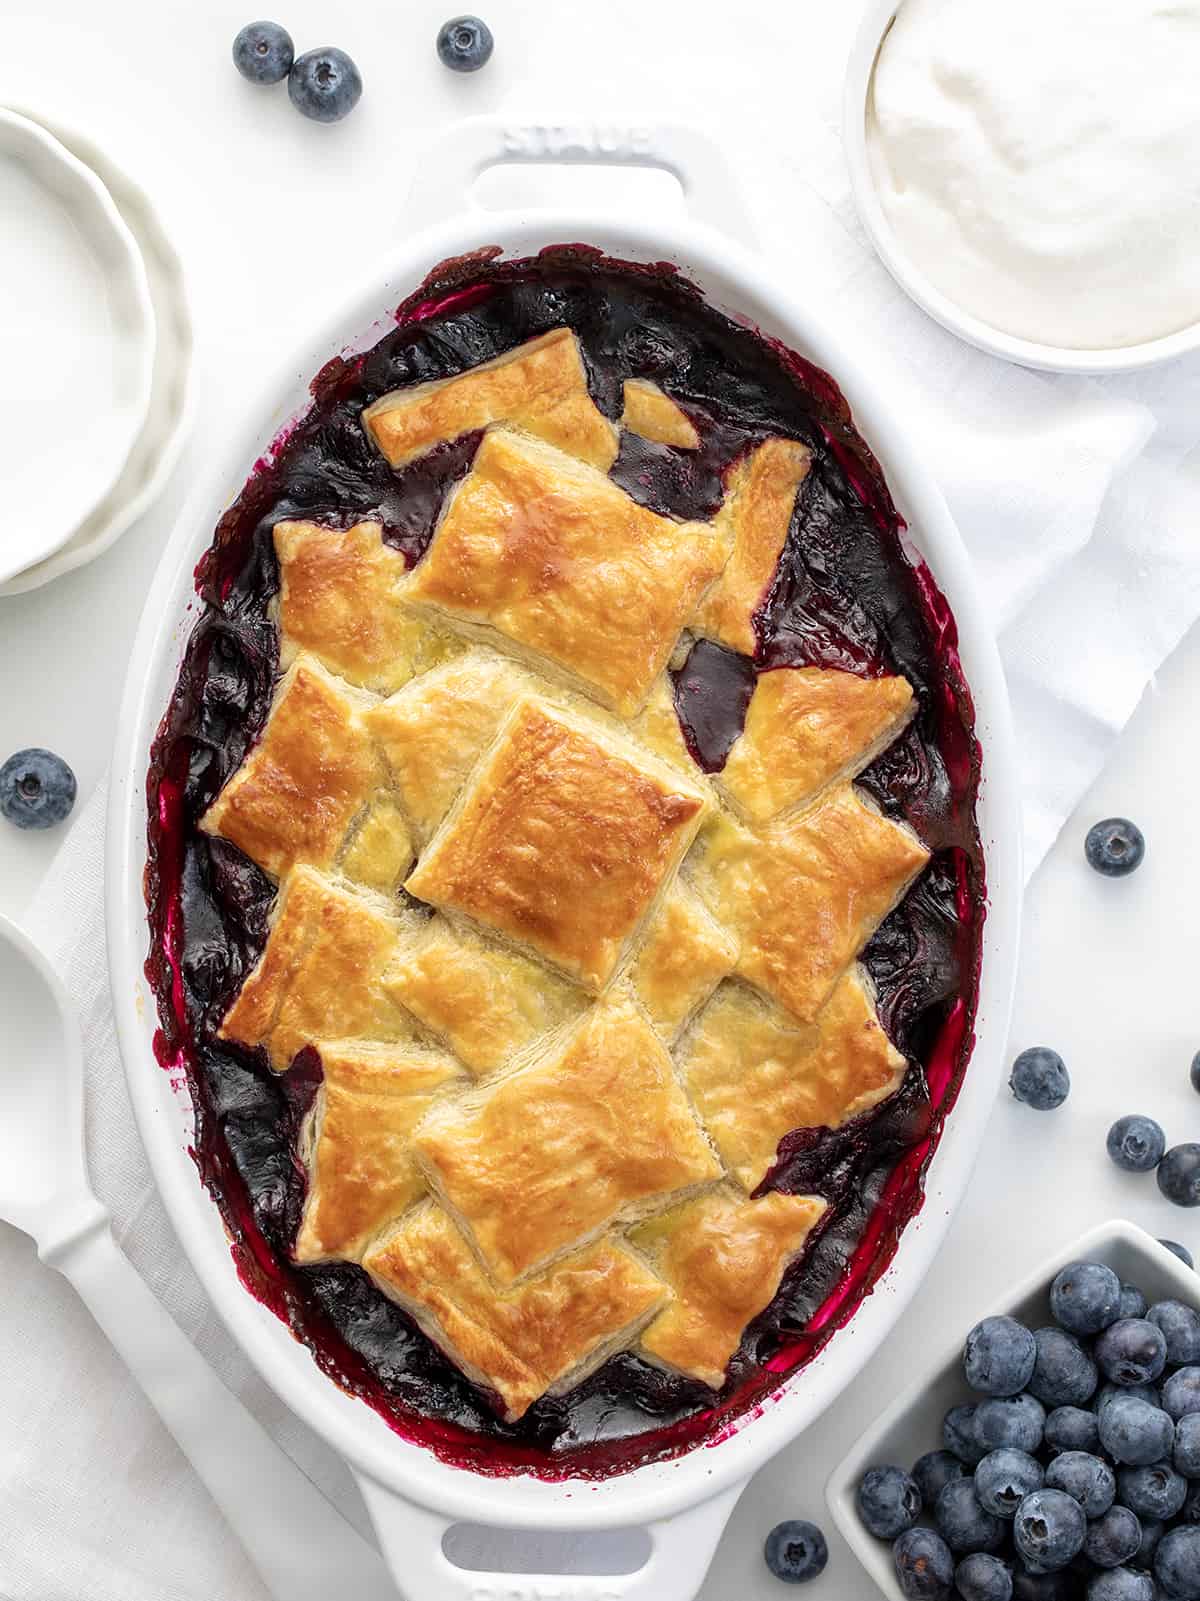 Pan of Blueberry Puff Pastry Bake from Overhead Surrounded by Blueberries and white Dishes.